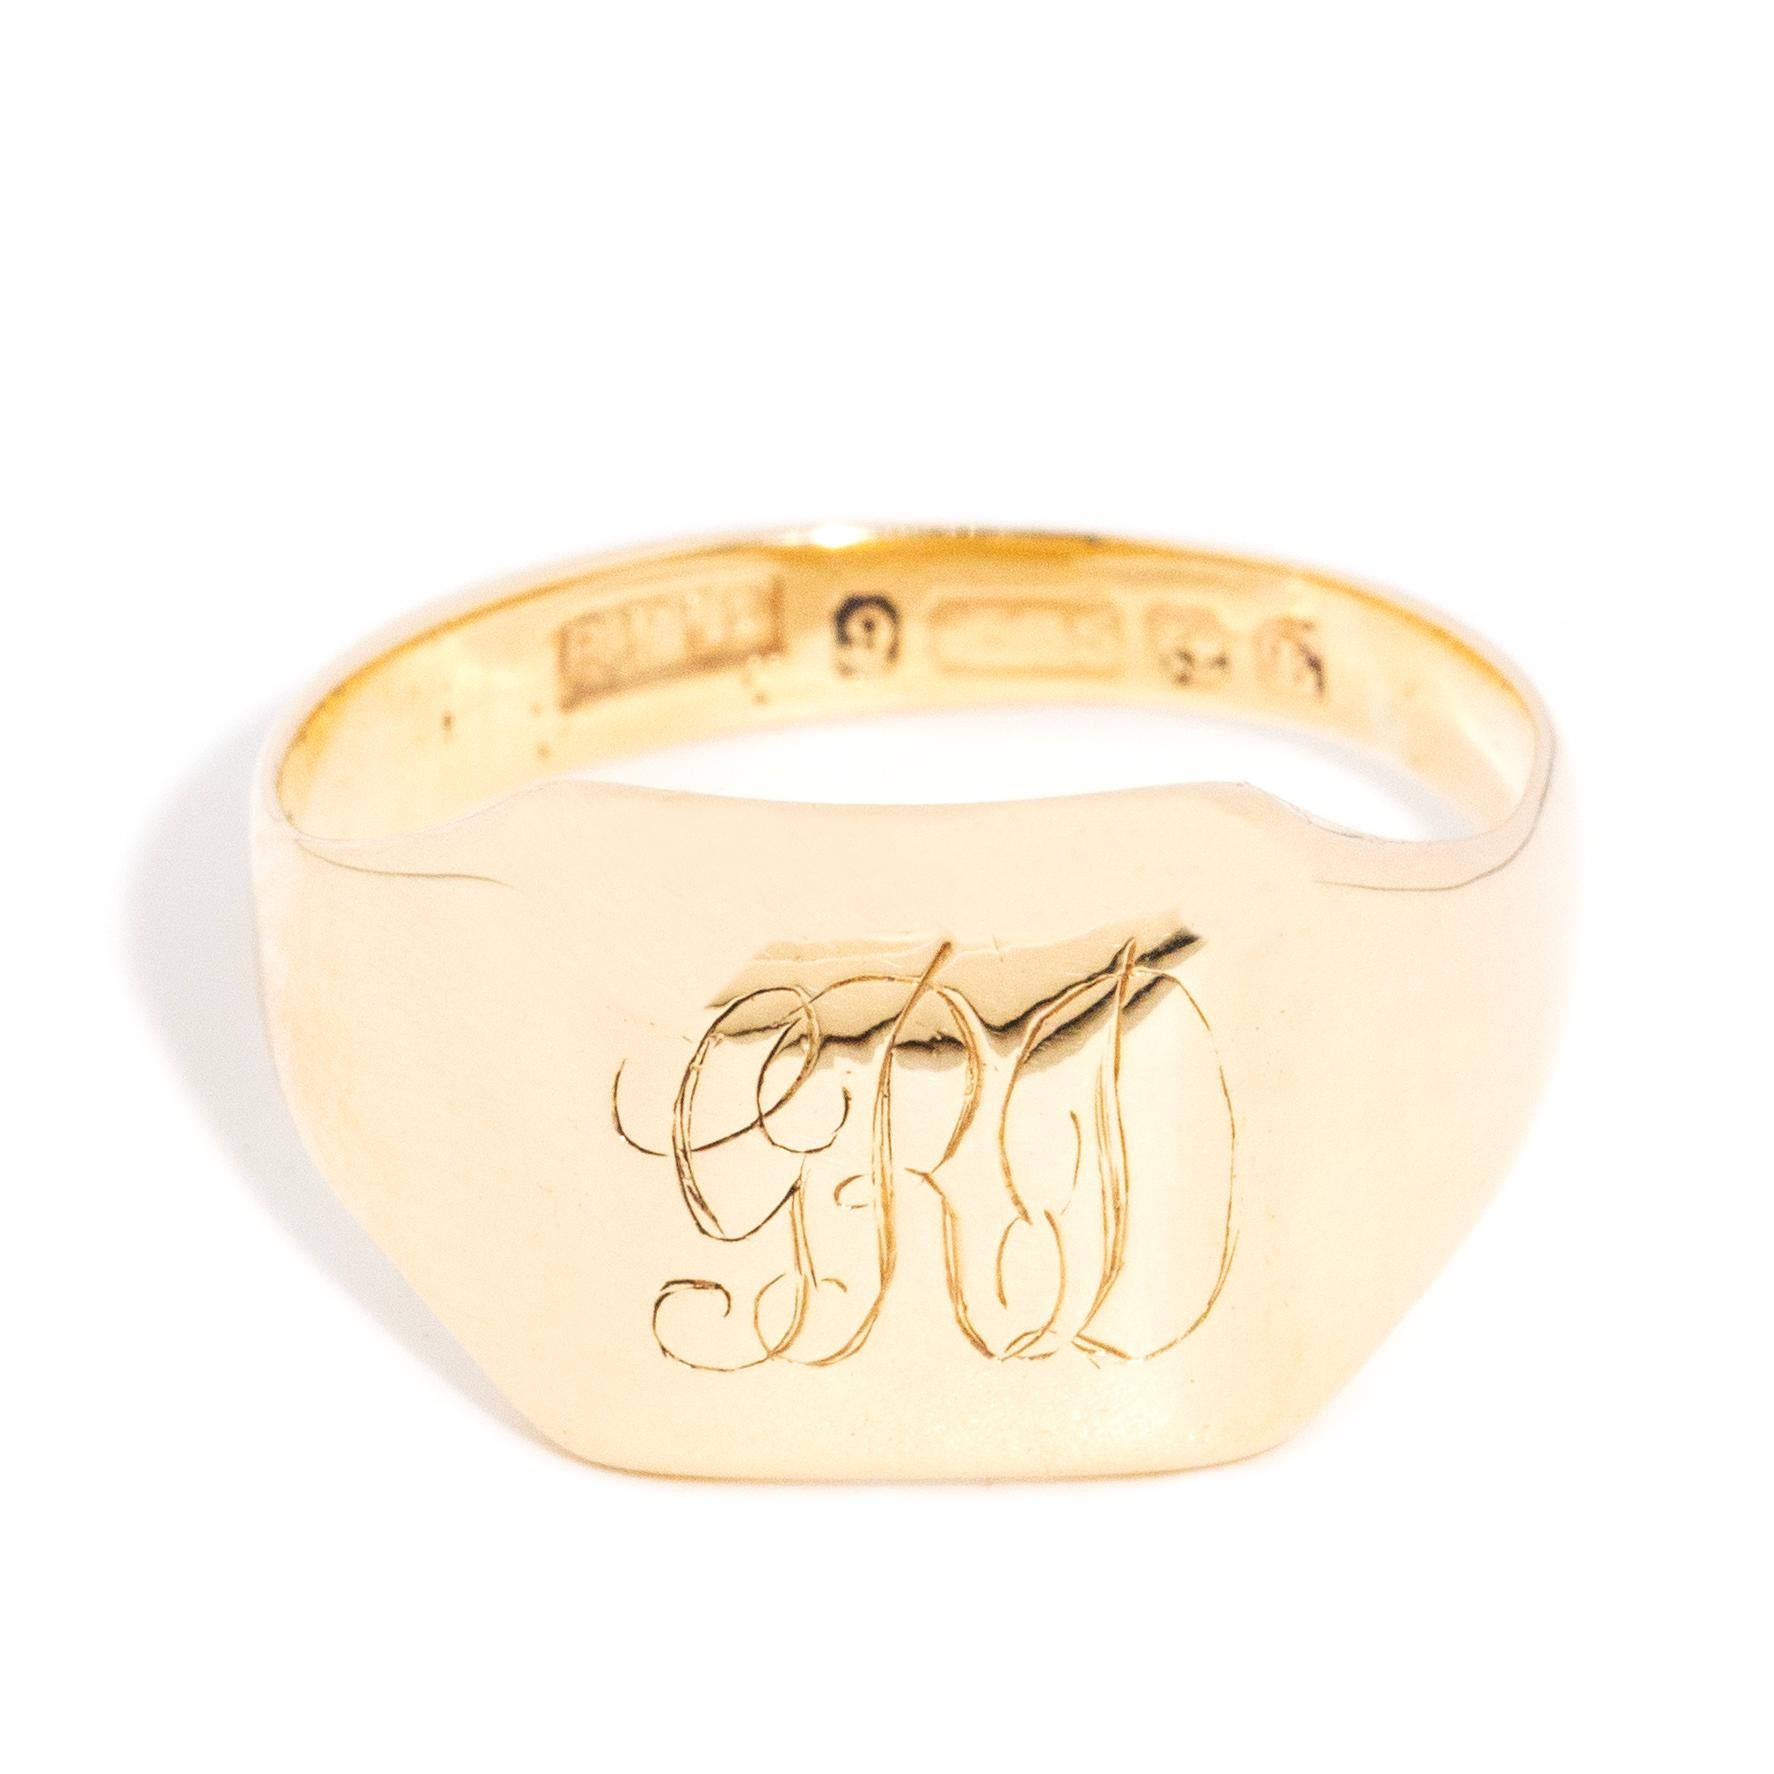 Handsomely crafted in 9 carat gold, our Gerald Ring holds a subtle presence.  A cushioned top, lightly engraved is a memory of a life long past.  Now is the time for new histories, new families and a new you.

Hallmarks Explained
P.P.LD - maker's